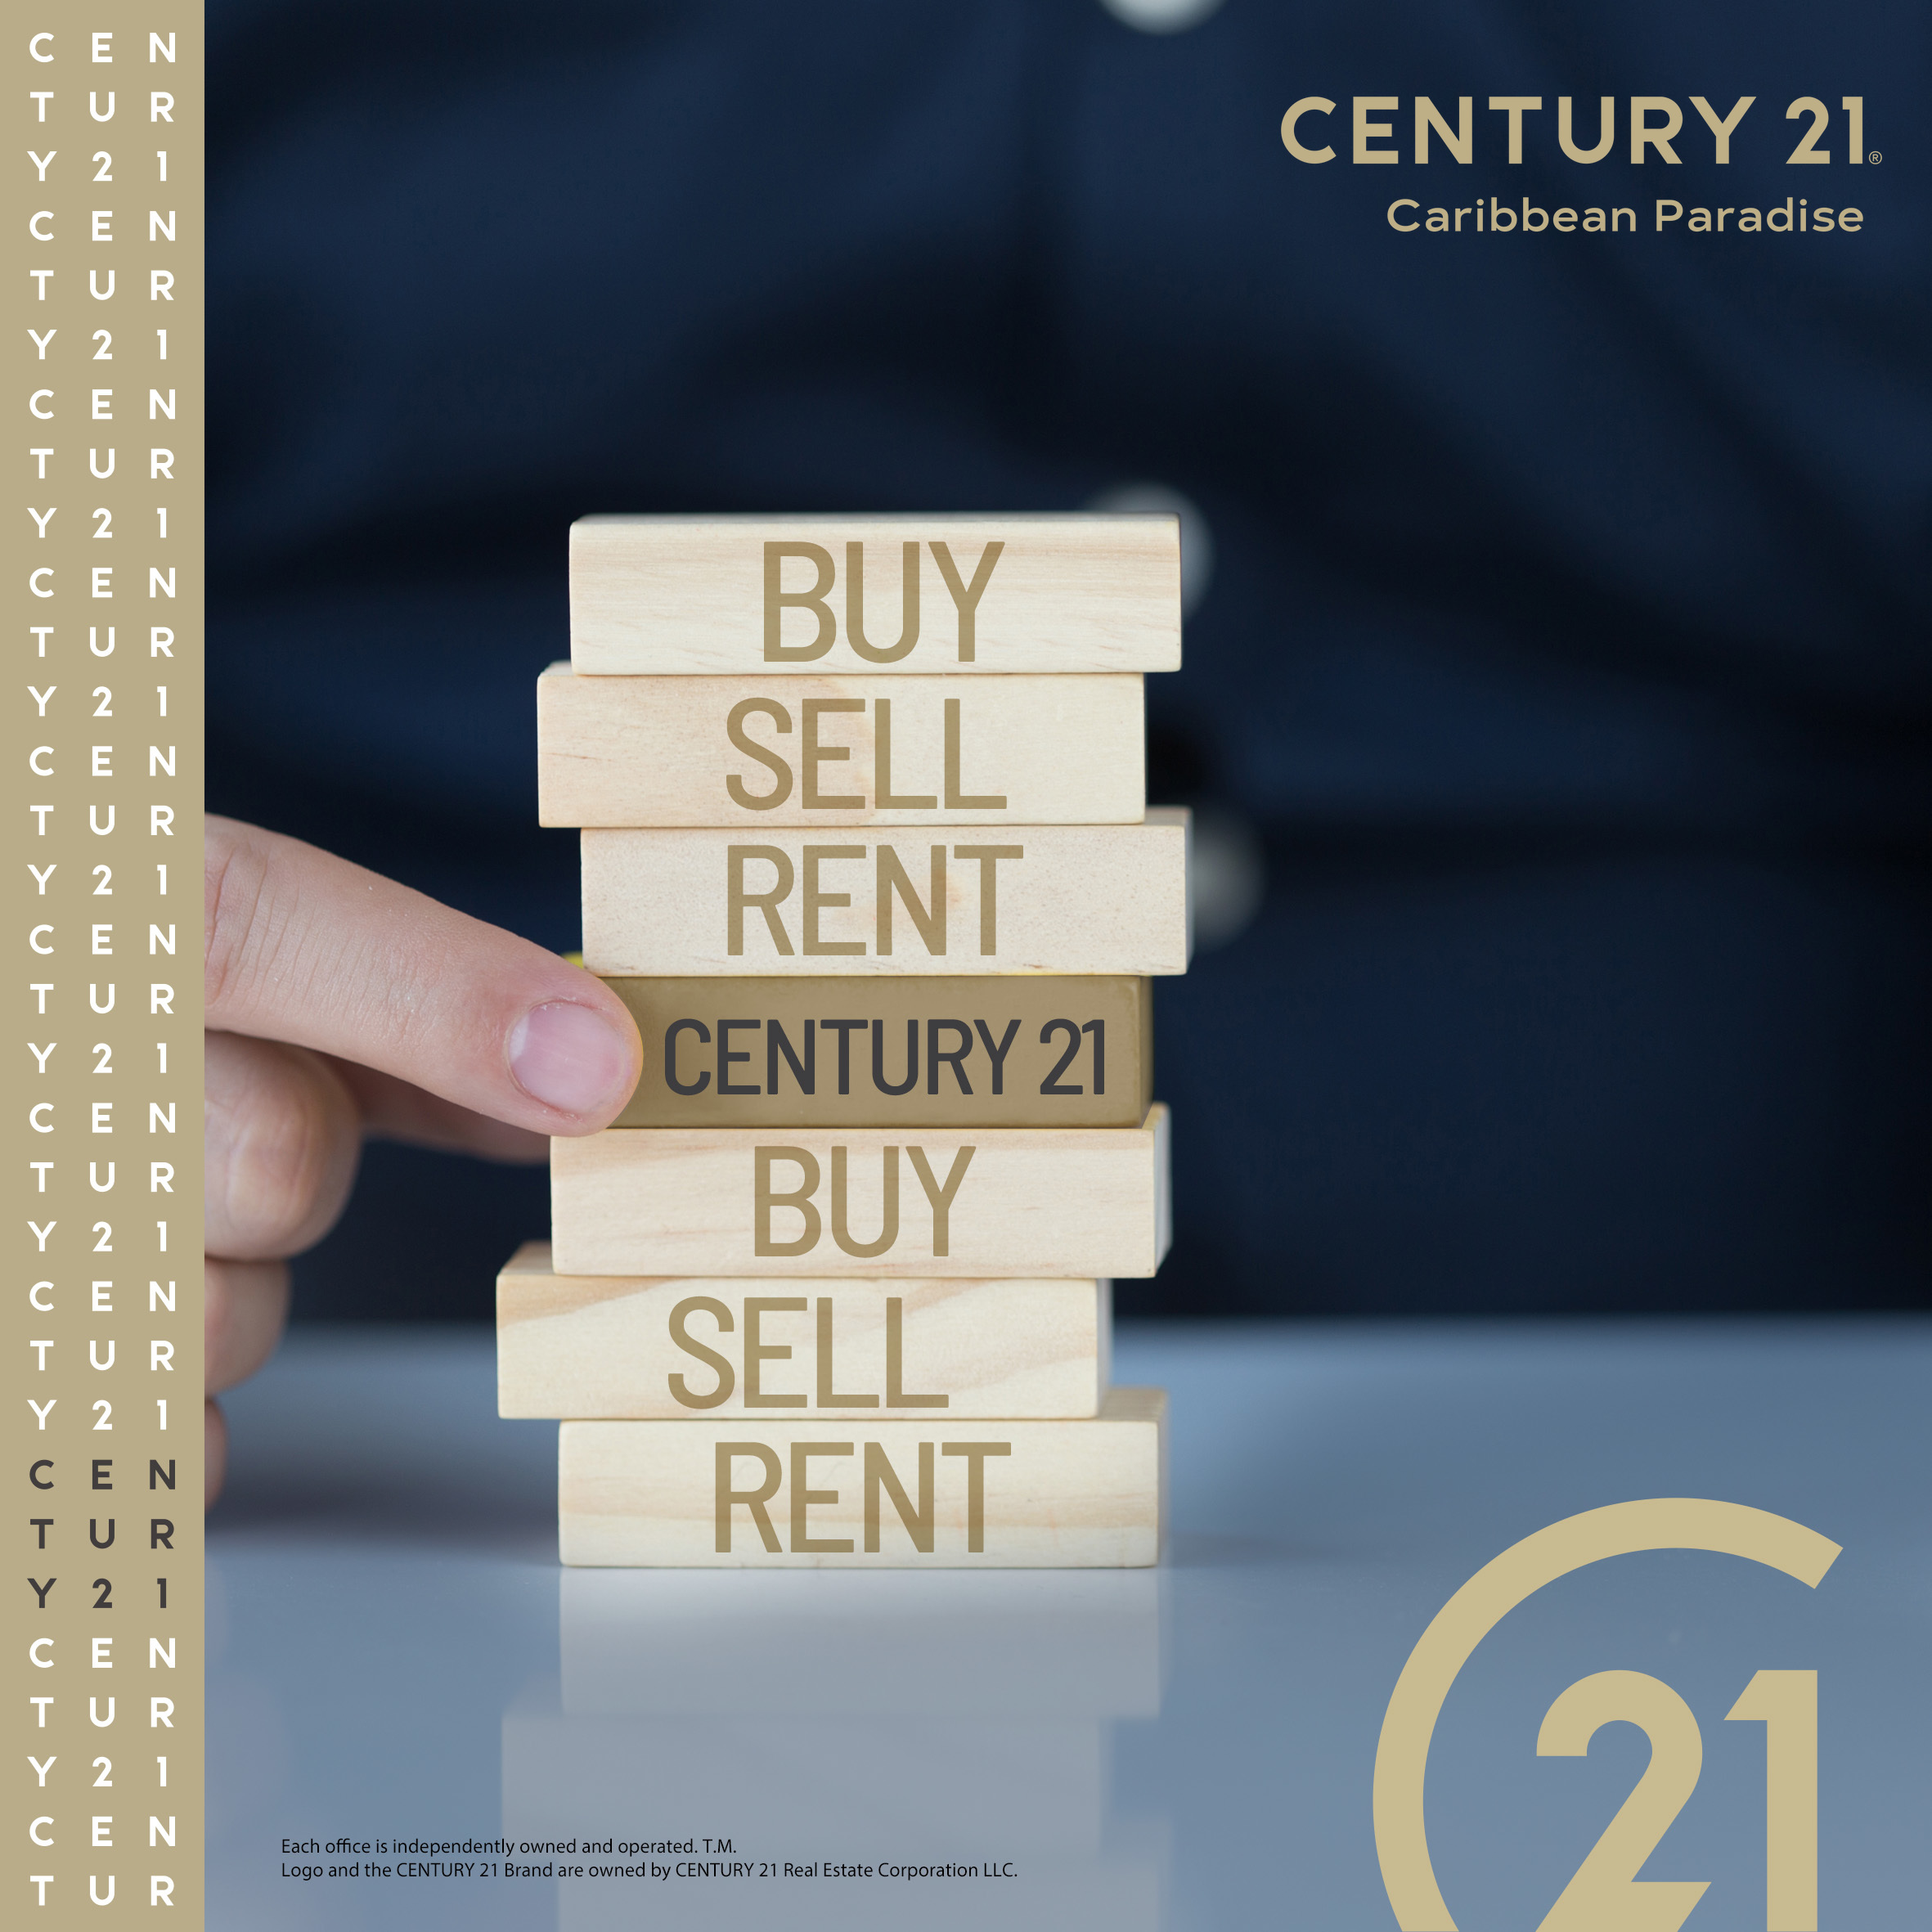 Century 21 guide you on all the steps